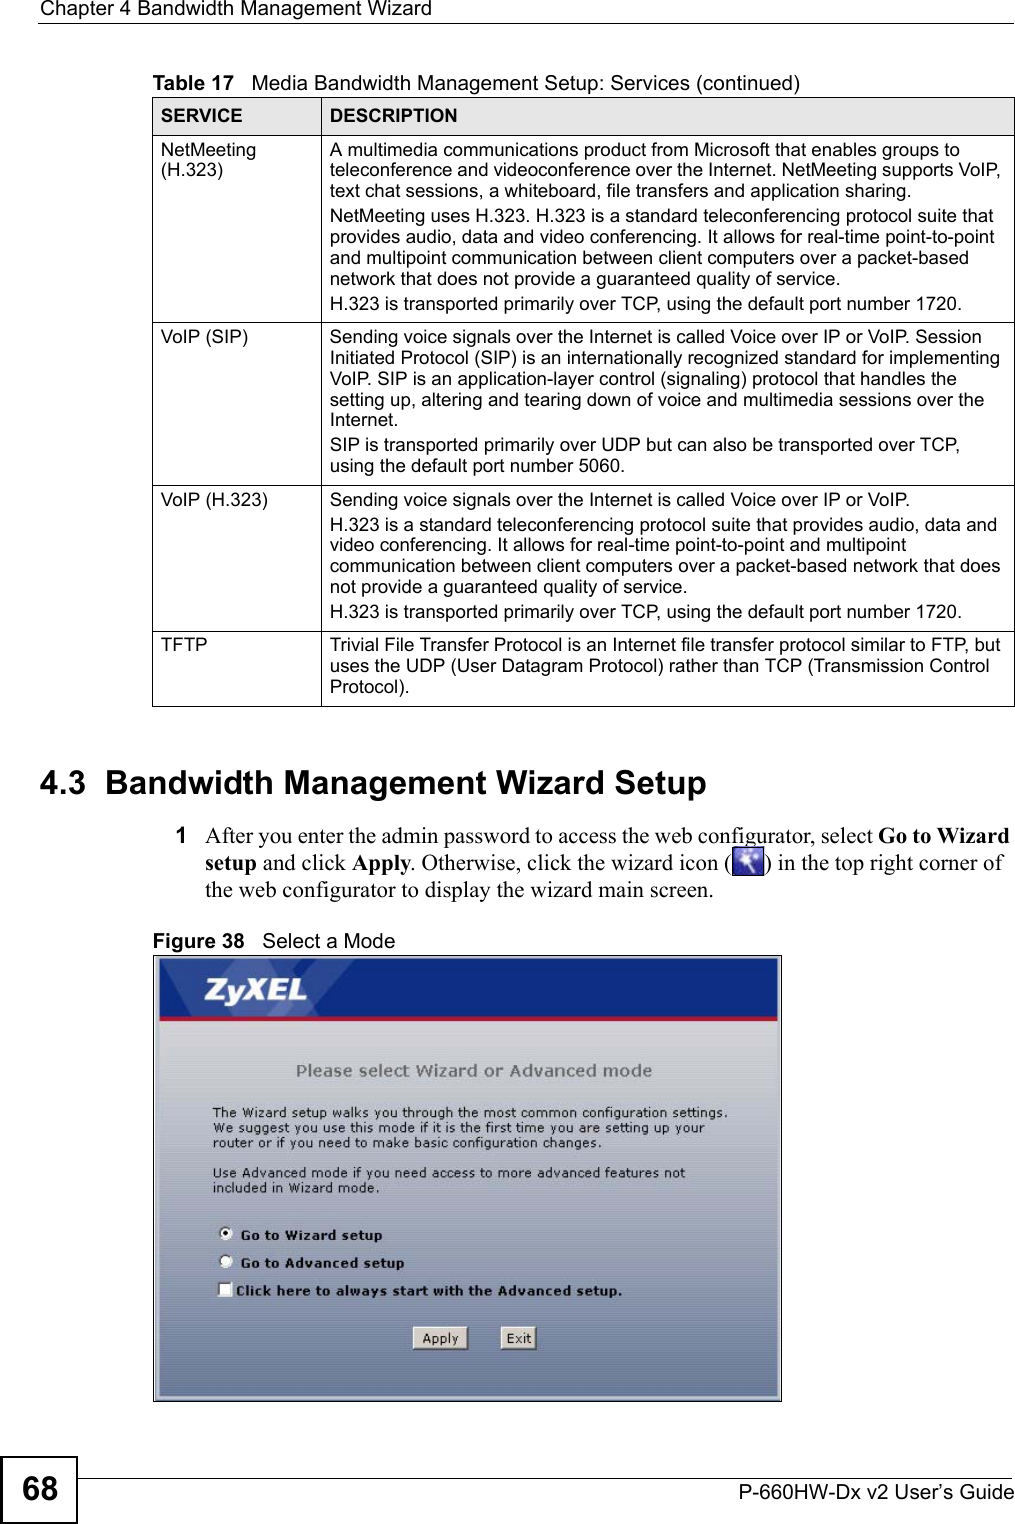 Chapter 4 Bandwidth Management WizardP-660HW-Dx v2 User’s Guide684.3  Bandwidth Management Wizard Setup1After you enter the admin password to access the web configurator, select Go to Wizard setup and click Apply. Otherwise, click the wizard icon ( ) in the top right corner of the web configurator to display the wizard main screen. Figure 38   Select a ModeNetMeeting (H.323)A multimedia communications product from Microsoft that enables groups to teleconference and videoconference over the Internet. NetMeeting supports VoIP, text chat sessions, a whiteboard, file transfers and application sharing. NetMeeting uses H.323. H.323 is a standard teleconferencing protocol suite that provides audio, data and video conferencing. It allows for real-time point-to-point and multipoint communication between client computers over a packet-based network that does not provide a guaranteed quality of service. H.323 is transported primarily over TCP, using the default port number 1720. VoIP (SIP) Sending voice signals over the Internet is called Voice over IP or VoIP. Session Initiated Protocol (SIP) is an internationally recognized standard for implementing VoIP. SIP is an application-layer control (signaling) protocol that handles the setting up, altering and tearing down of voice and multimedia sessions over the Internet.SIP is transported primarily over UDP but can also be transported over TCP, using the default port number 5060. VoIP (H.323) Sending voice signals over the Internet is called Voice over IP or VoIP. H.323 is a standard teleconferencing protocol suite that provides audio, data and video conferencing. It allows for real-time point-to-point and multipoint communication between client computers over a packet-based network that does not provide a guaranteed quality of service. H.323 is transported primarily over TCP, using the default port number 1720. TFTP Trivial File Transfer Protocol is an Internet file transfer protocol similar to FTP, but uses the UDP (User Datagram Protocol) rather than TCP (Transmission Control Protocol).Table 17   Media Bandwidth Management Setup: Services (continued)SERVICE DESCRIPTION